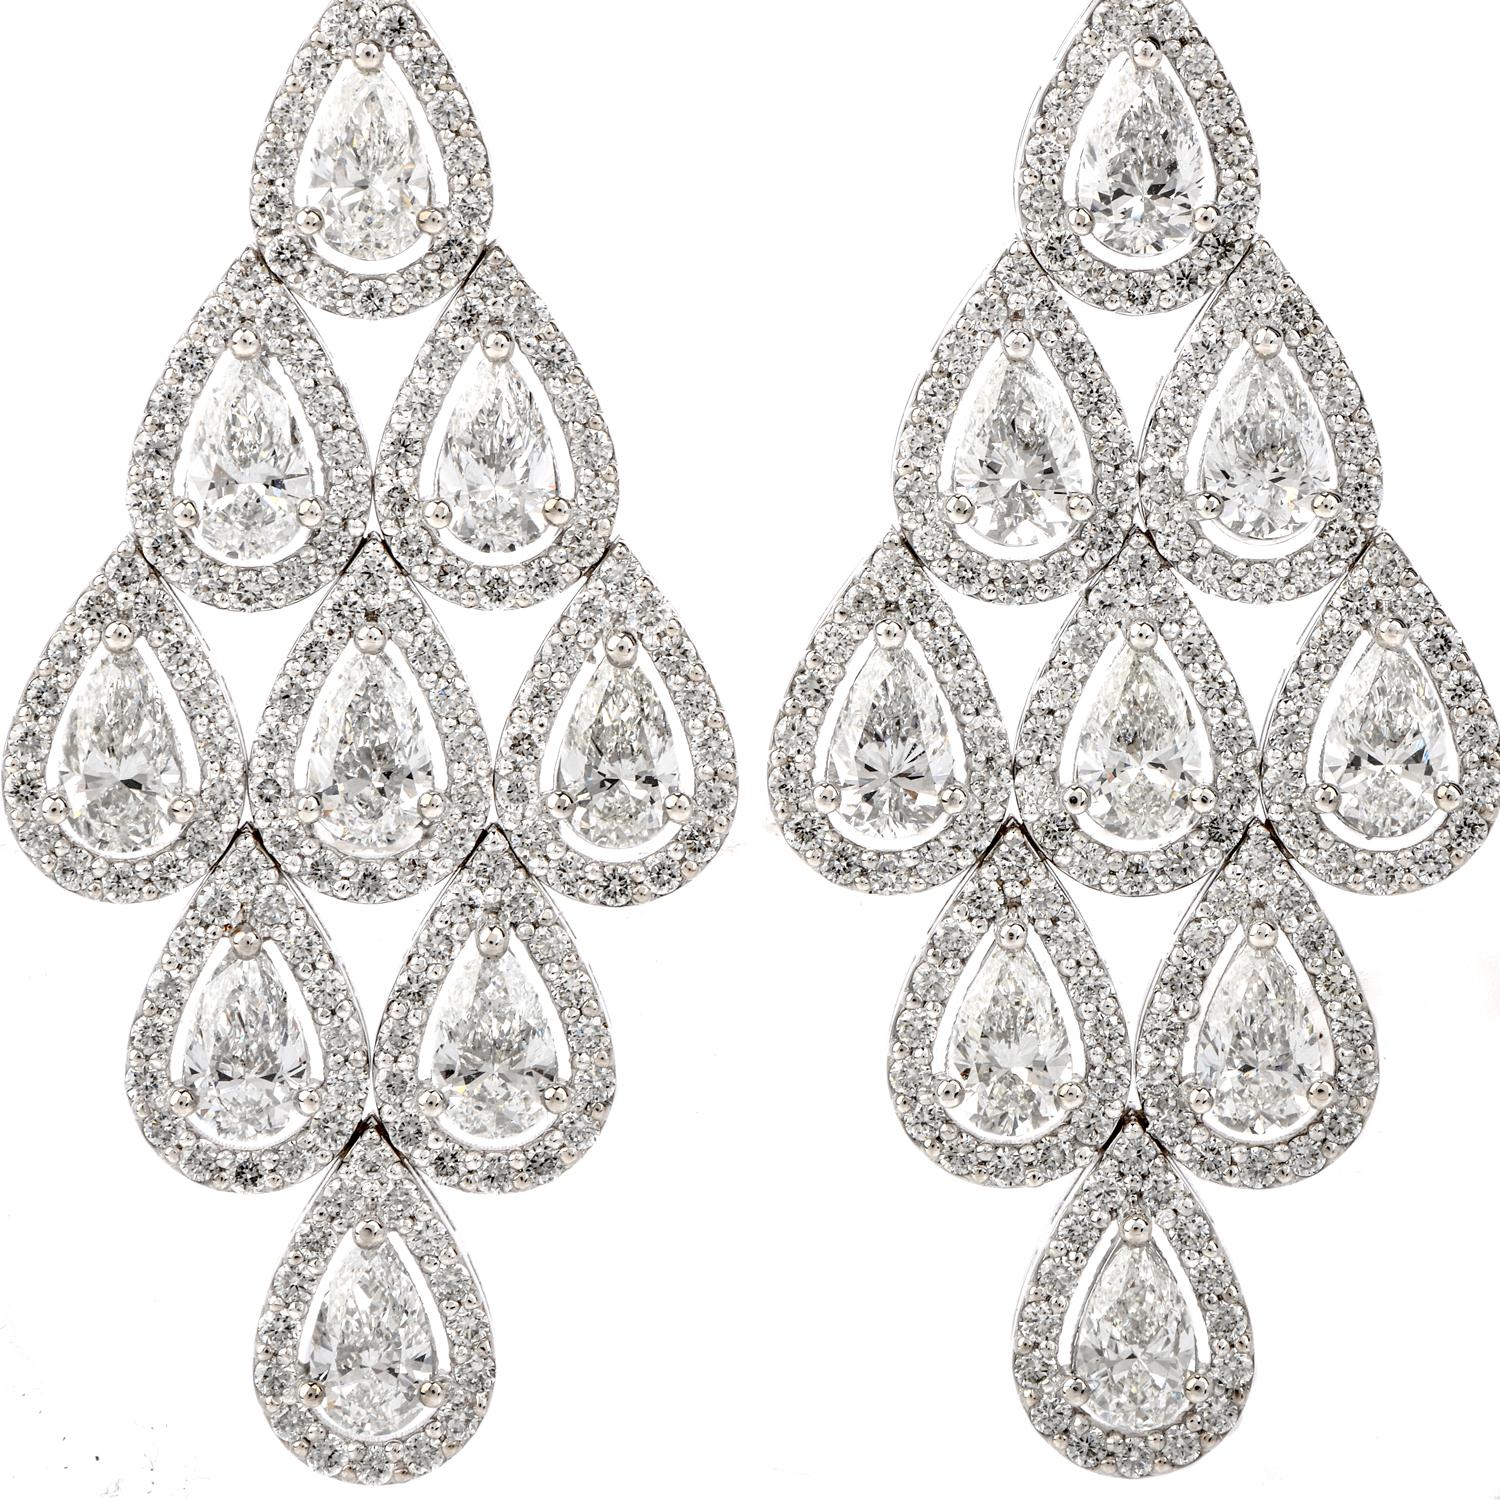 Sparkle elegantly across the room with these breathtaking Estate Diamond 18K Gold Pear Halo Drop Chandelier Earrings.

  These fancy earrings are crafted in 18 karat weight gold.  They hold approximately 20 genuine pear shaped diamonds, prong set of